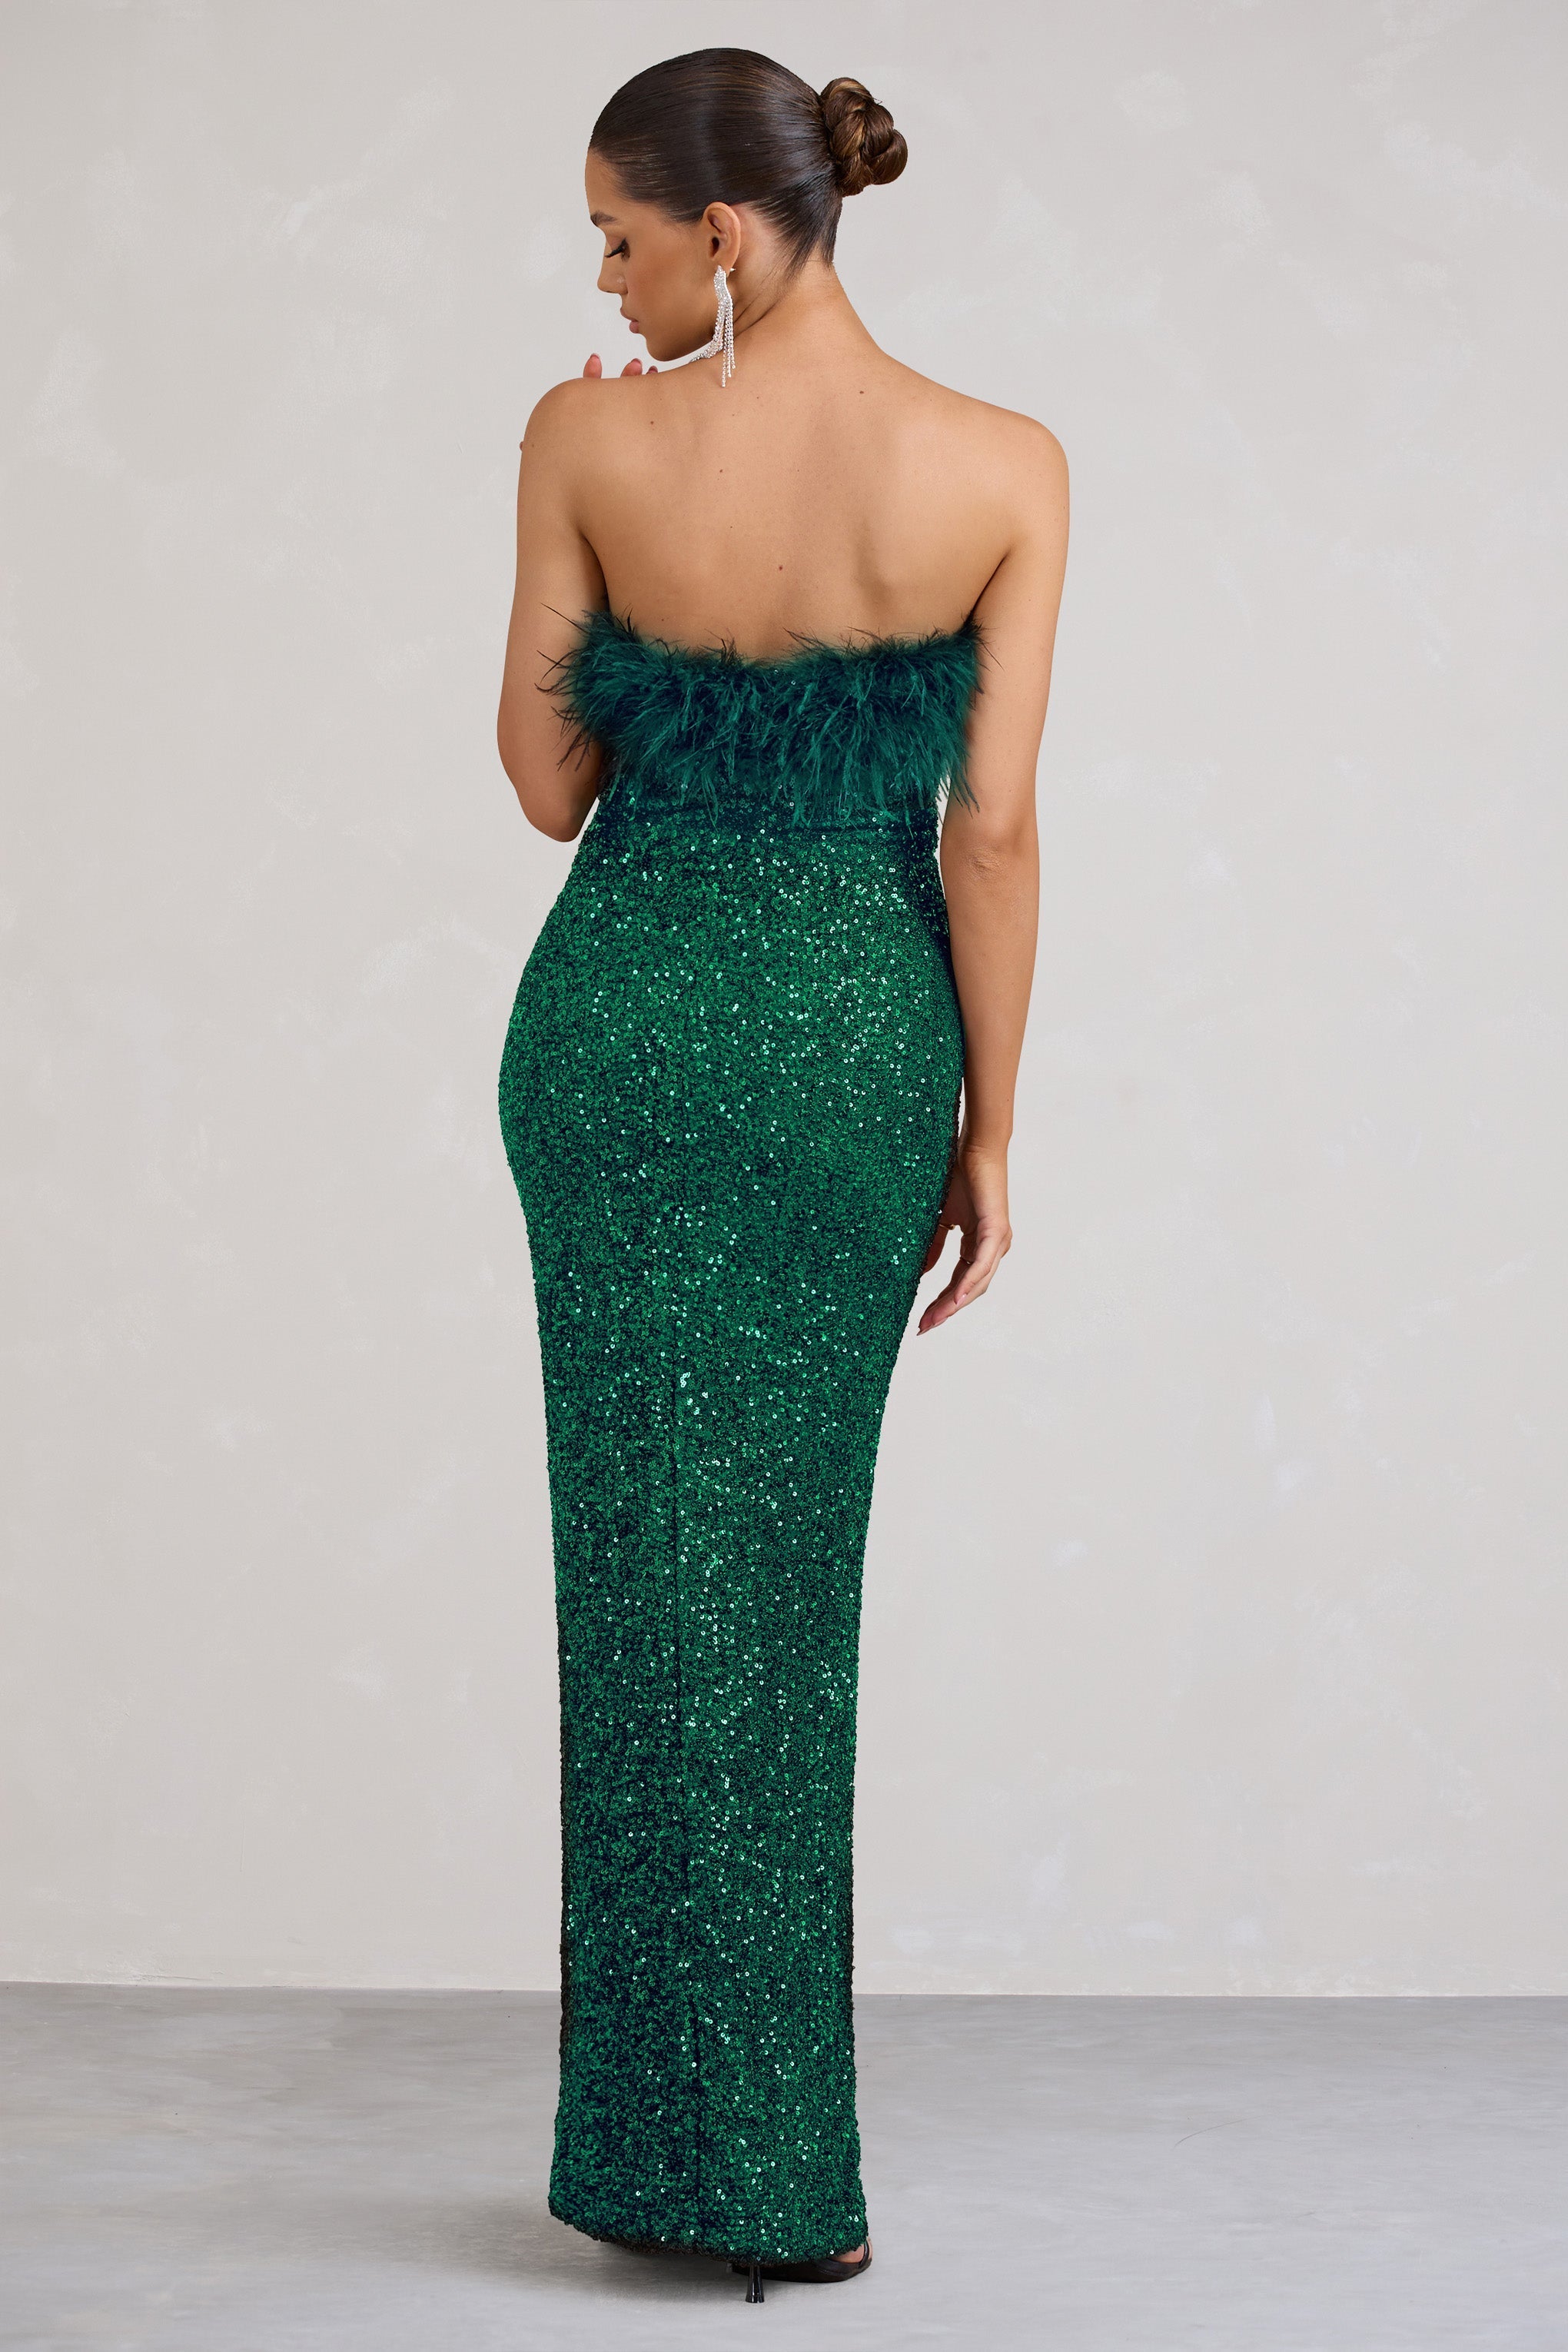 Old Money Bottle Green Bodycon Sequin Maxi Dress With Feather Trim